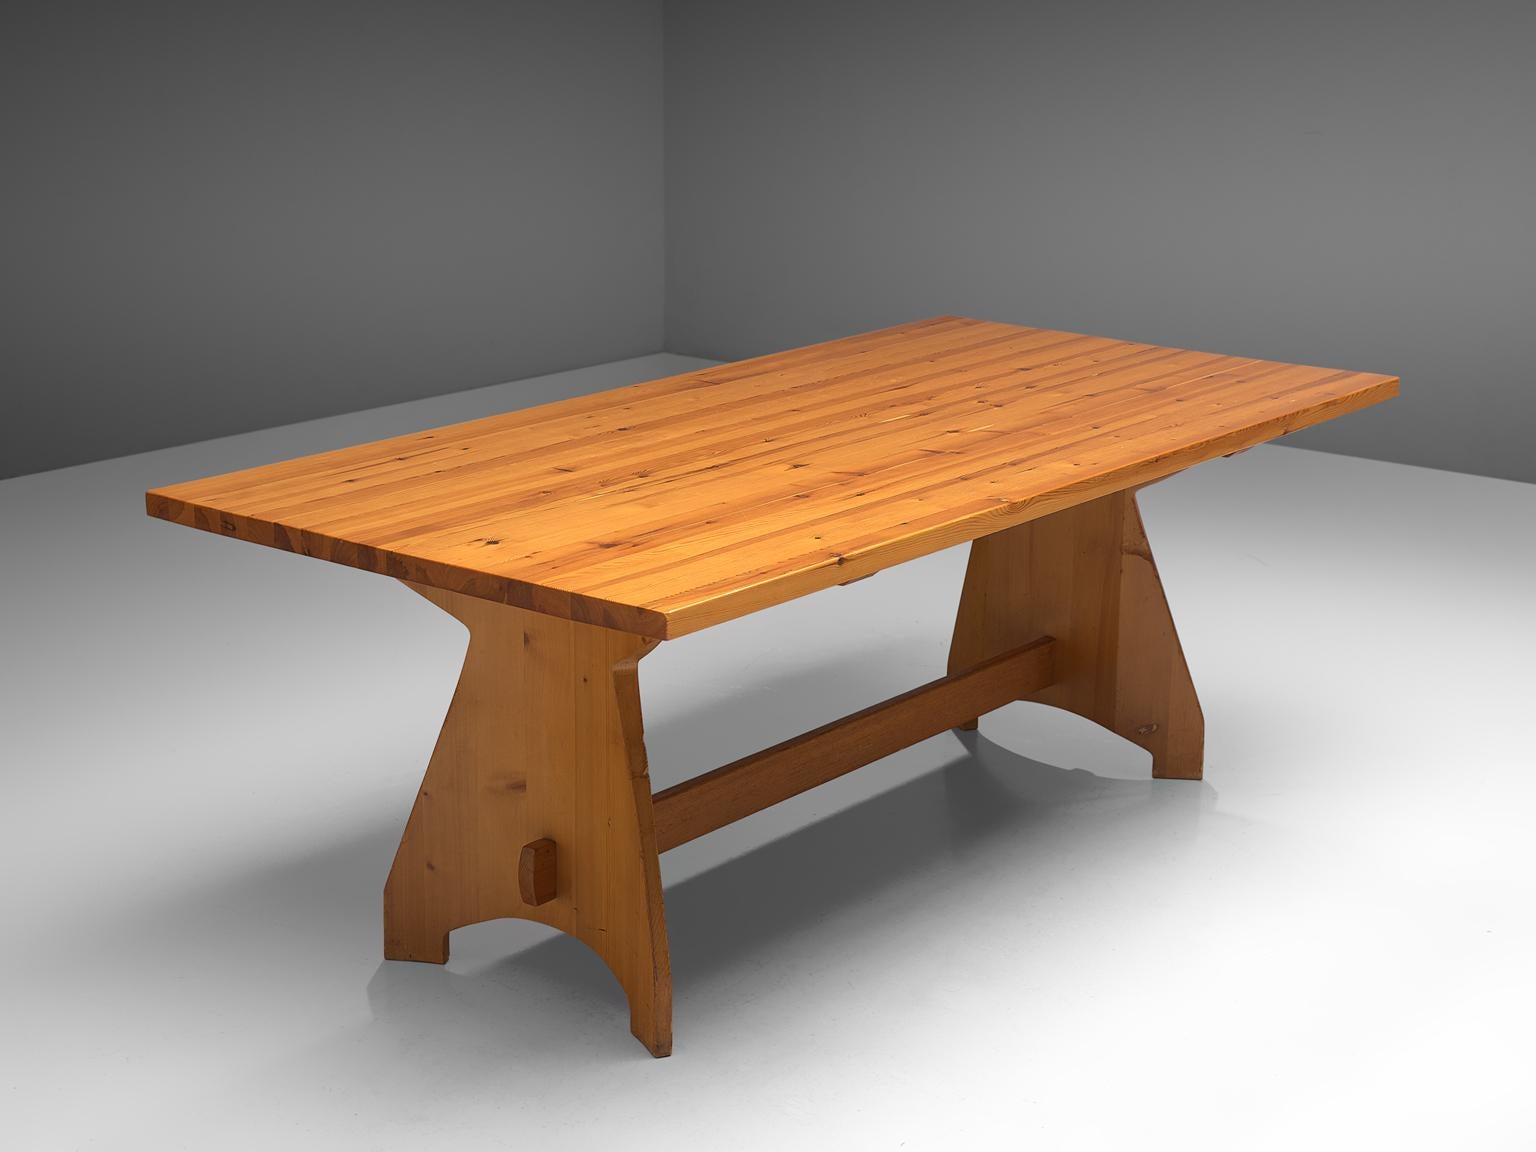 Jacob Kielland-Brandt, dining table, pine, Denmark, 1960s.

Rectangular dining table in solid pinewood. This classical kitchen table shows great craftsmanship, as seen on the wooden joints. The pinewood shows a nice warm grain, which can only be